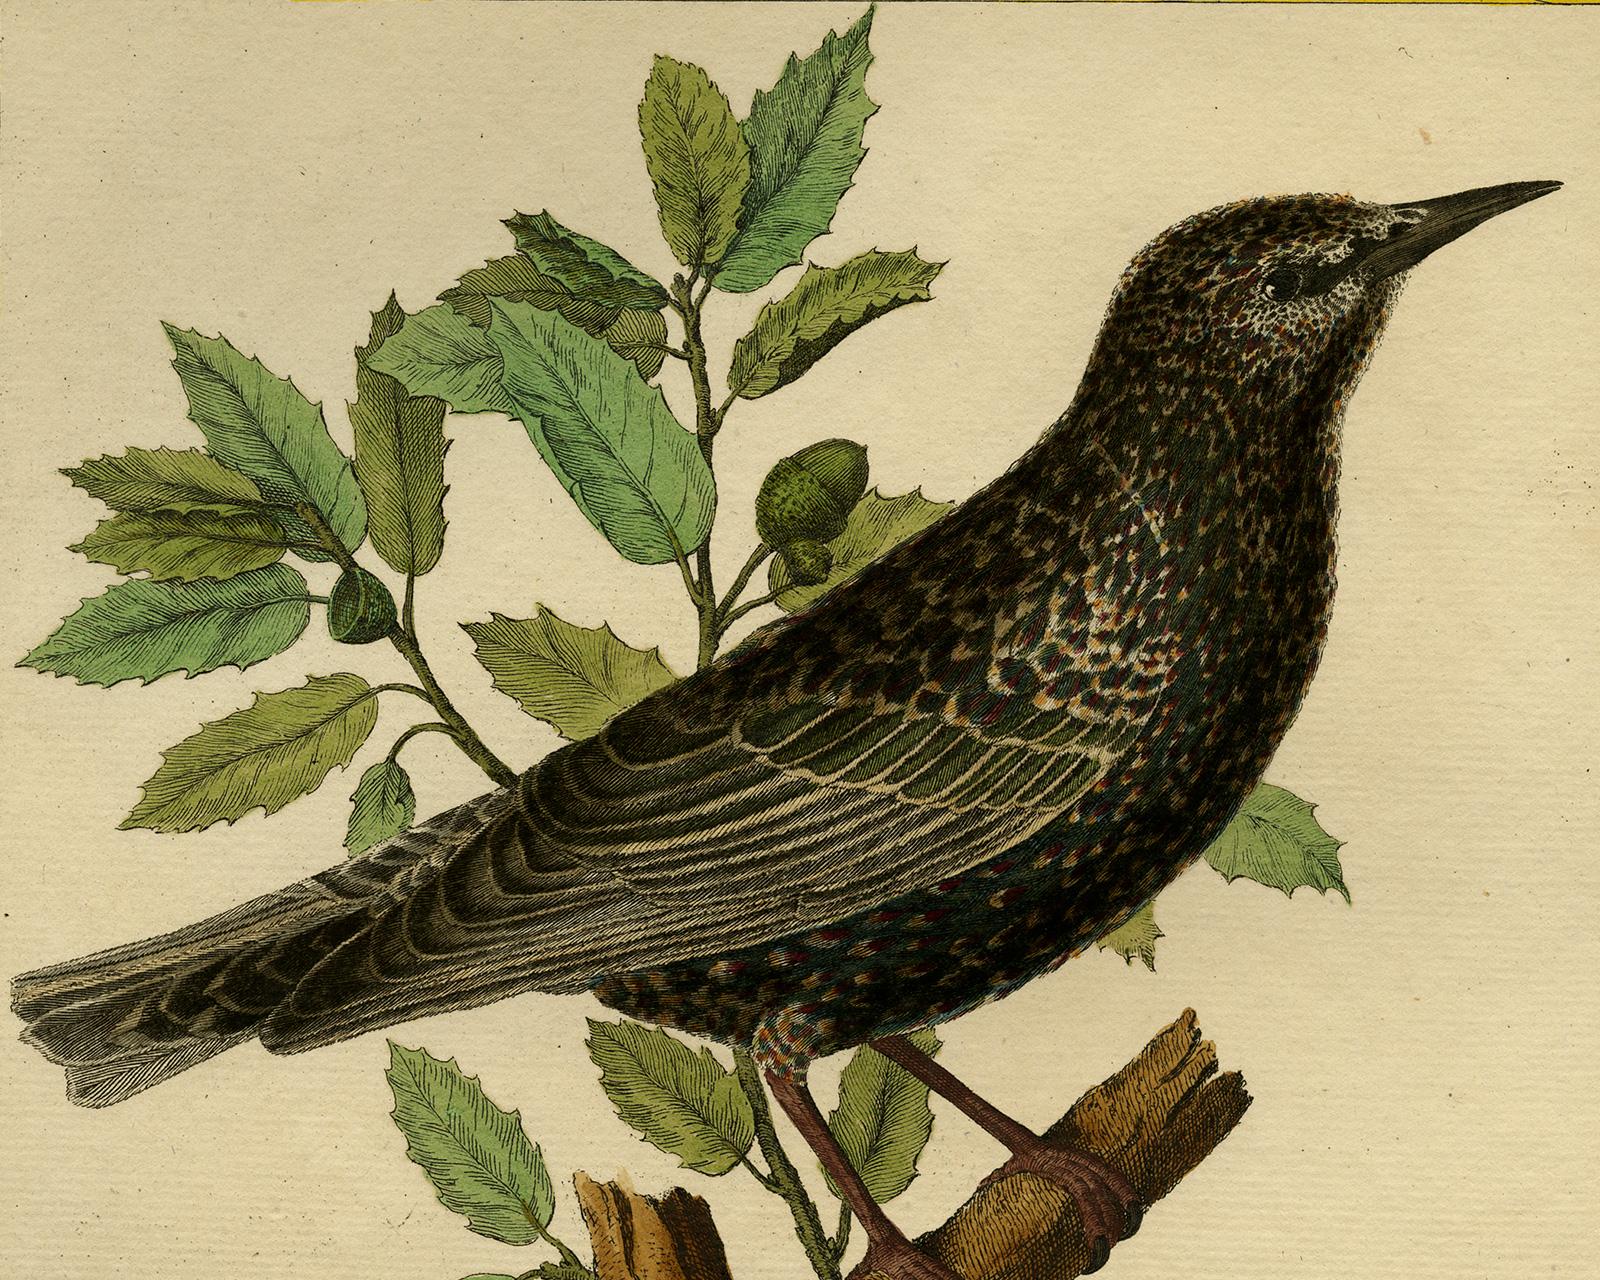 Starling by Martinet - Handcoloured engraving - 18th century - Old Masters Print by Francois Nicolas Martinet